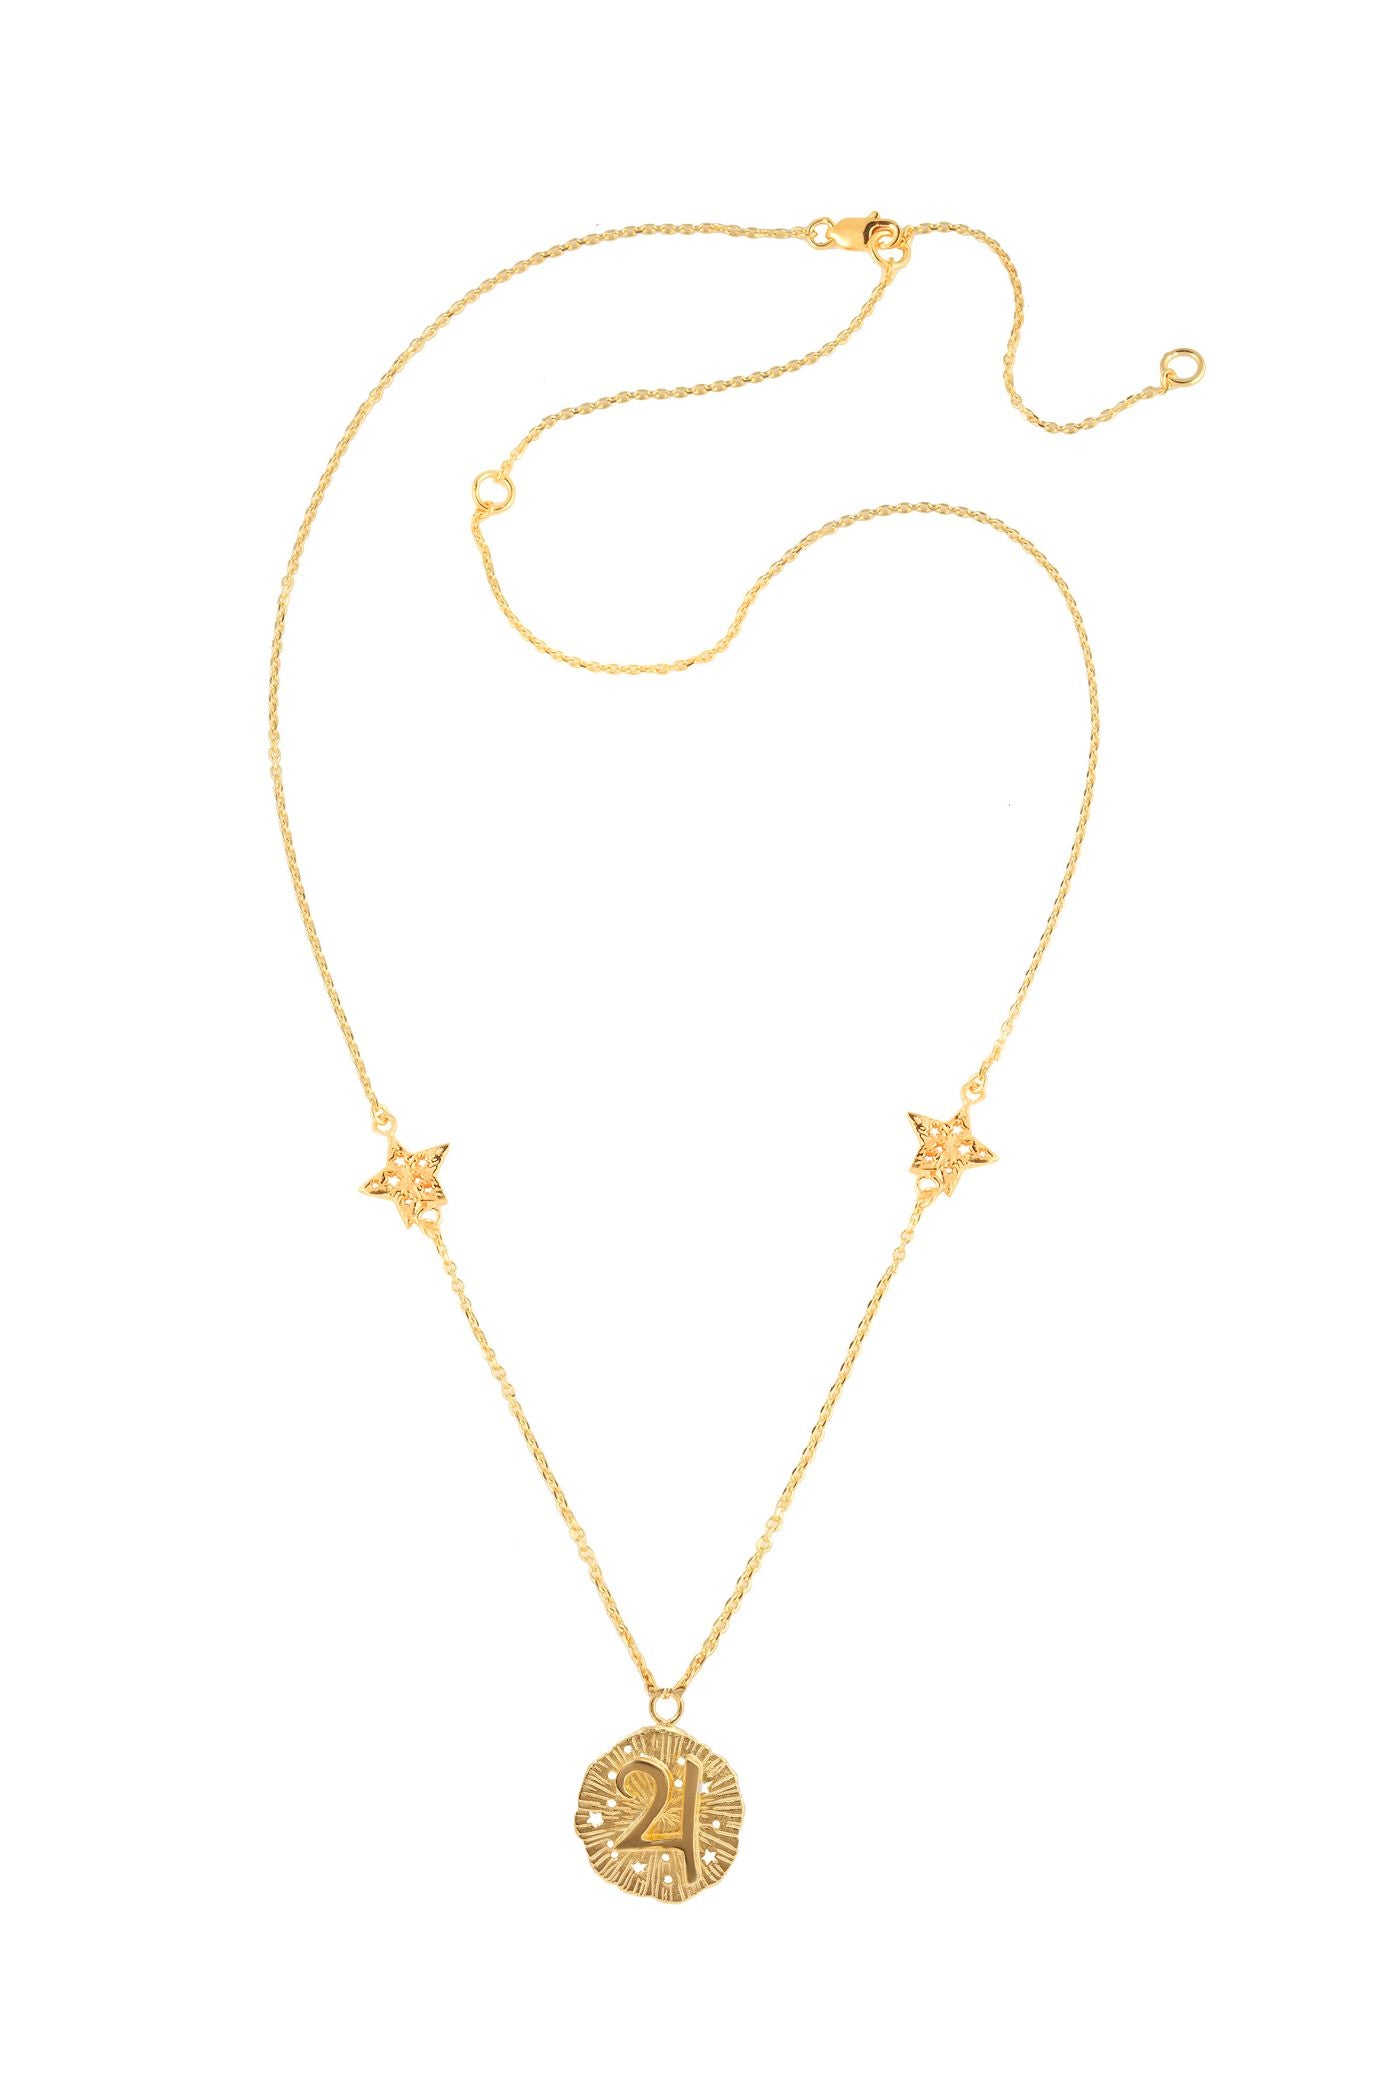 Jupiter with 2 stars on the chain necklace. 46 cm. Silver, gold-plated